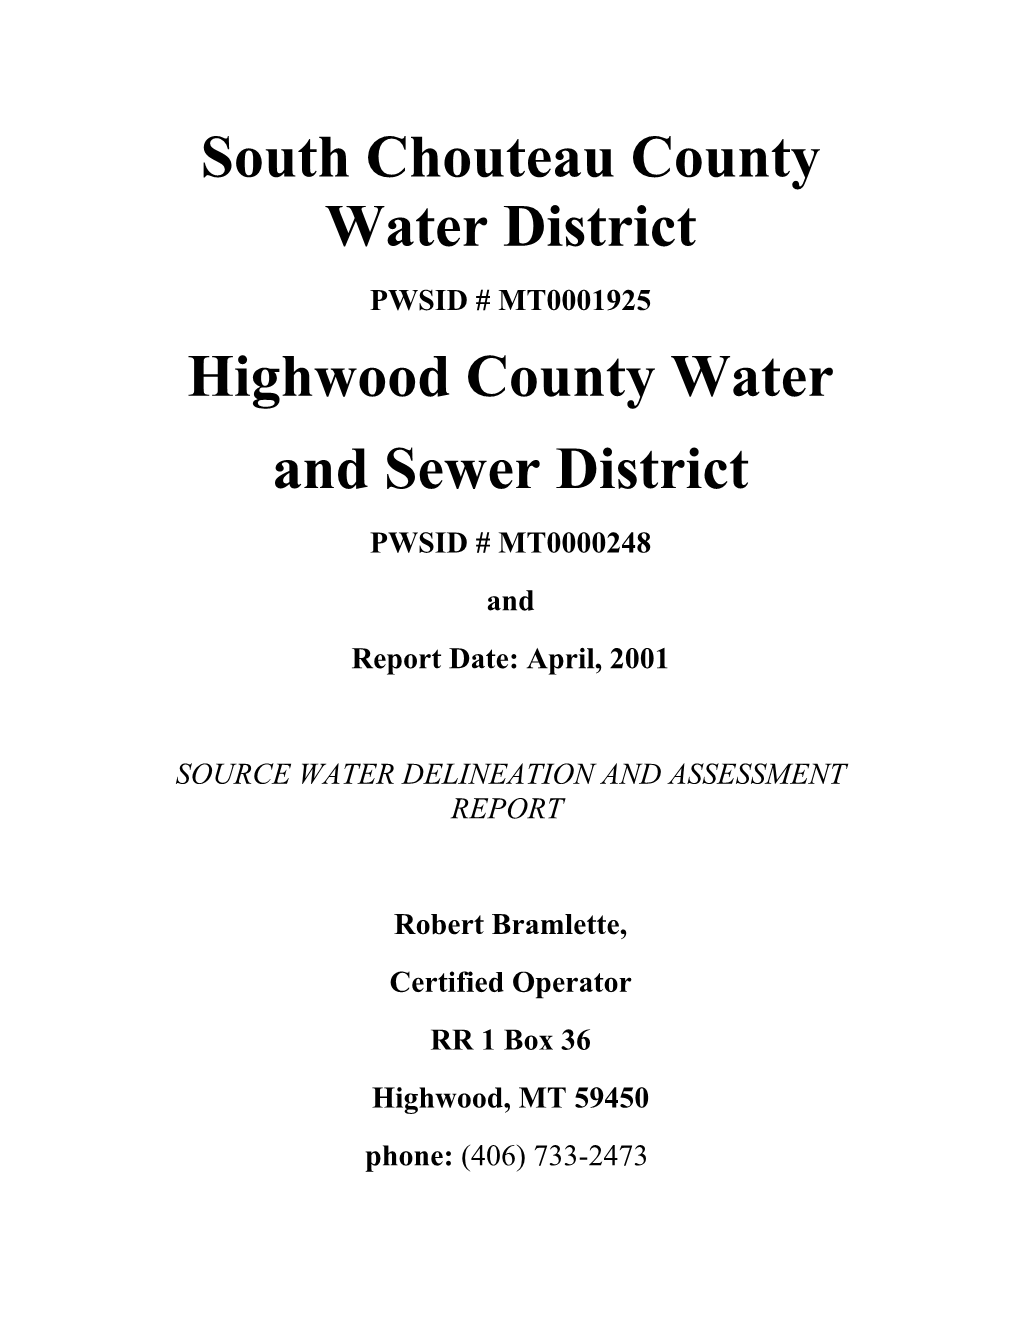 South Chouteau County Water District PWSID # MT0001925 Highwood County Water and Sewer District PWSID # MT0000248 and Report Date: April, 2001